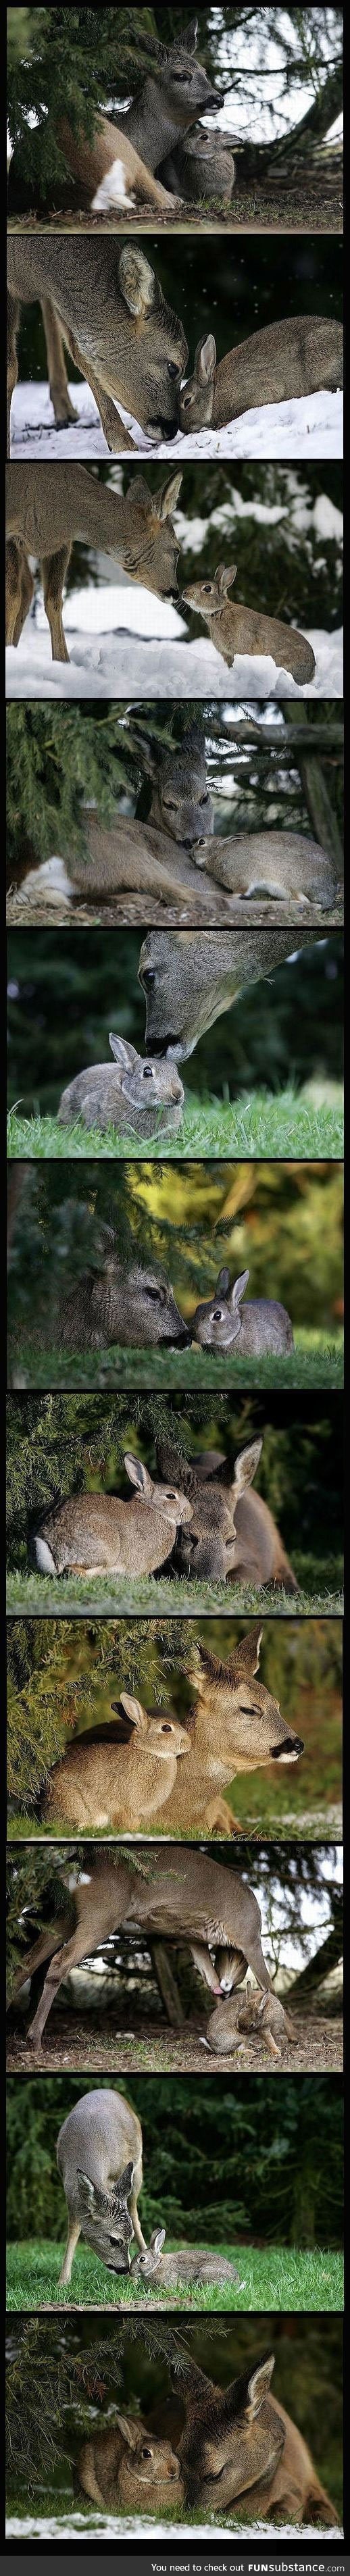 Bambi and Thumper!